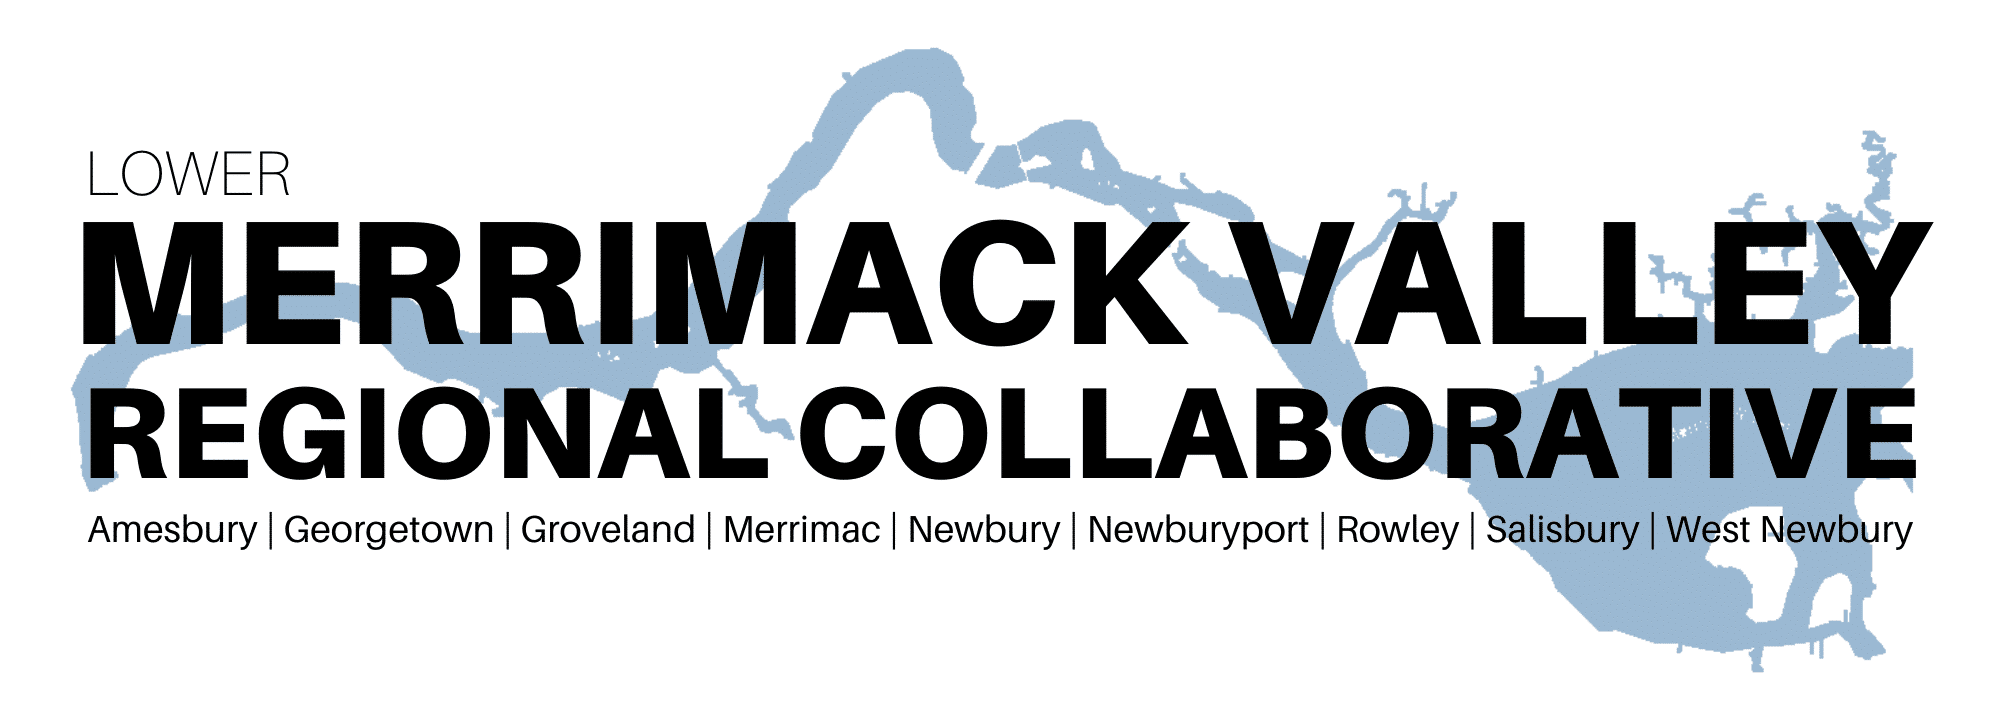 Lower Merrimack Valley Regional Collaborative Announces COVID-19 Vaccination Clinics for Children Ages 5-11